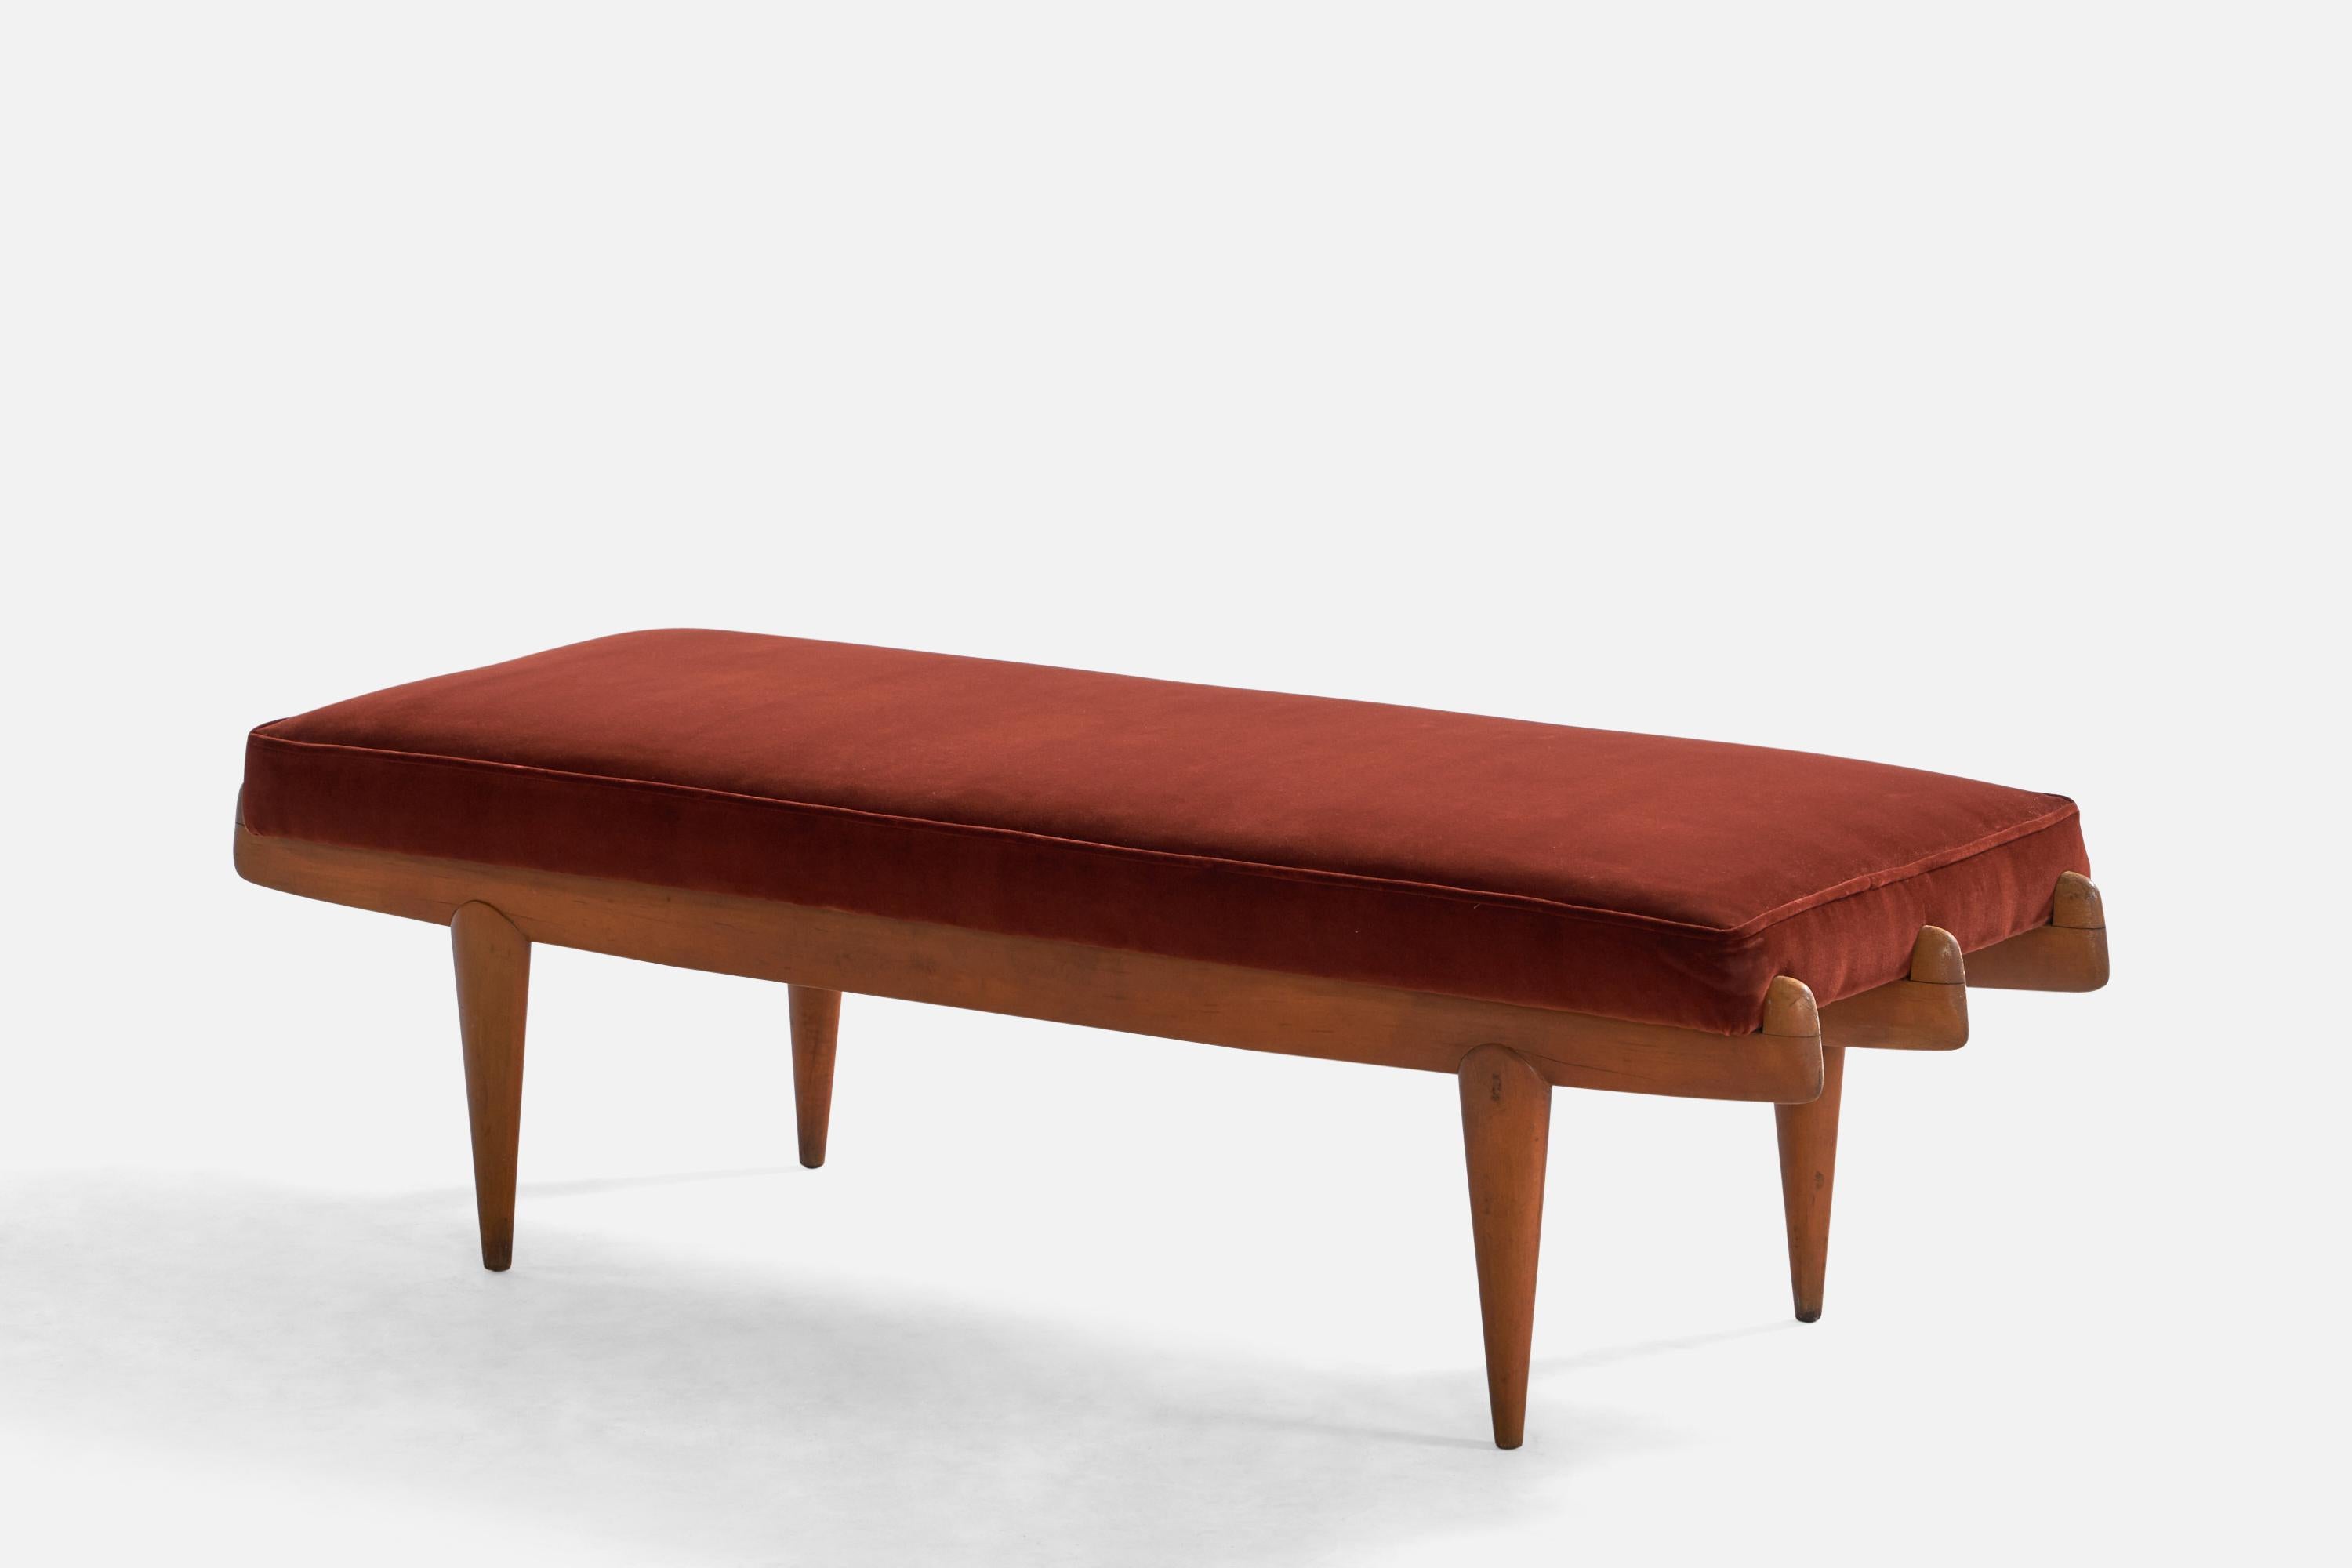 A beech and red mohair bench designed and produced in Italy, 1940s.

Seat height: 16”
